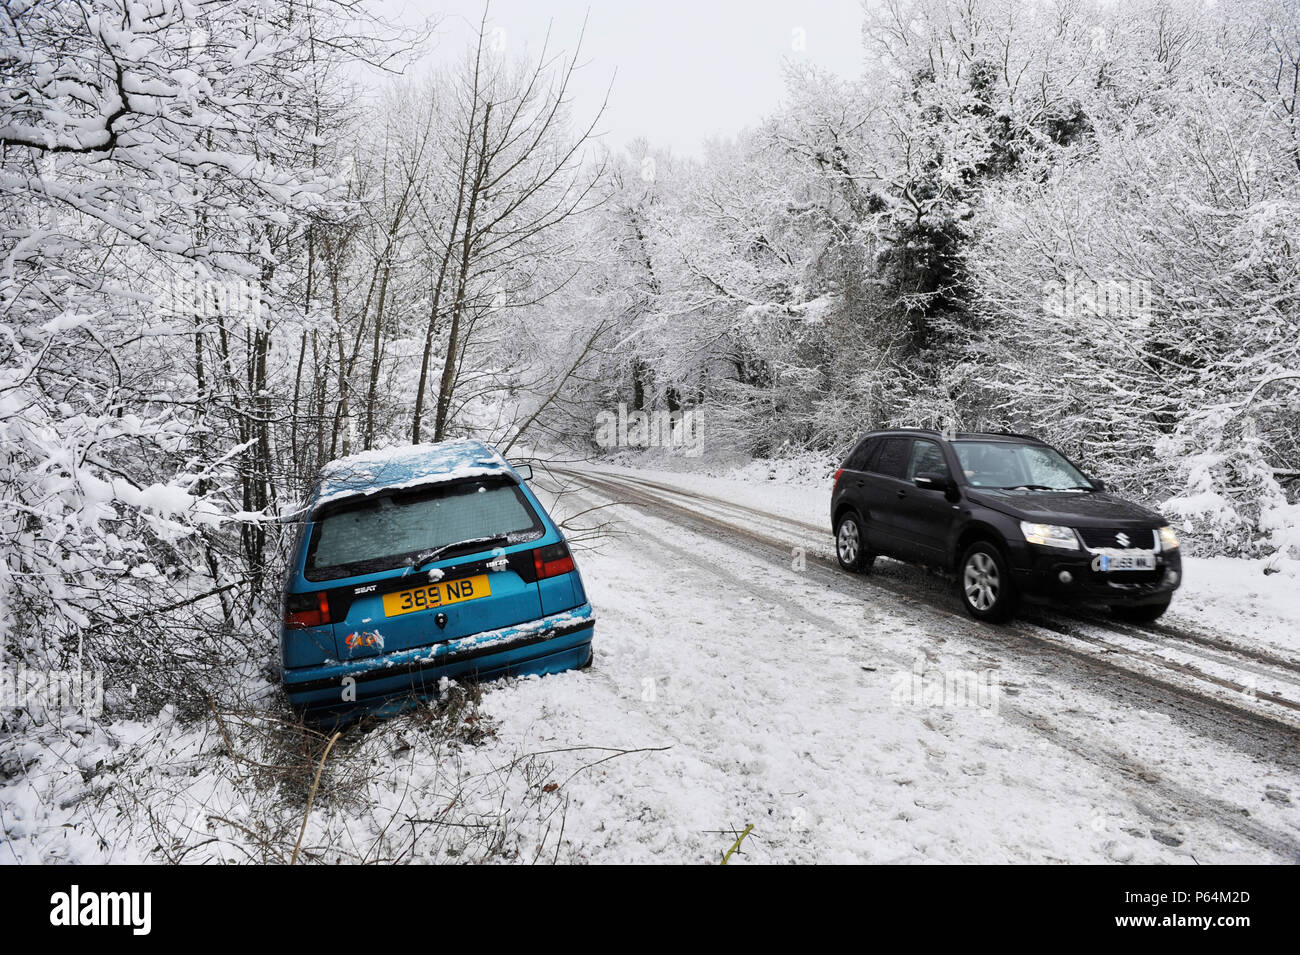 Abandoned car by side of road in snowy weather, UK Stock Photo